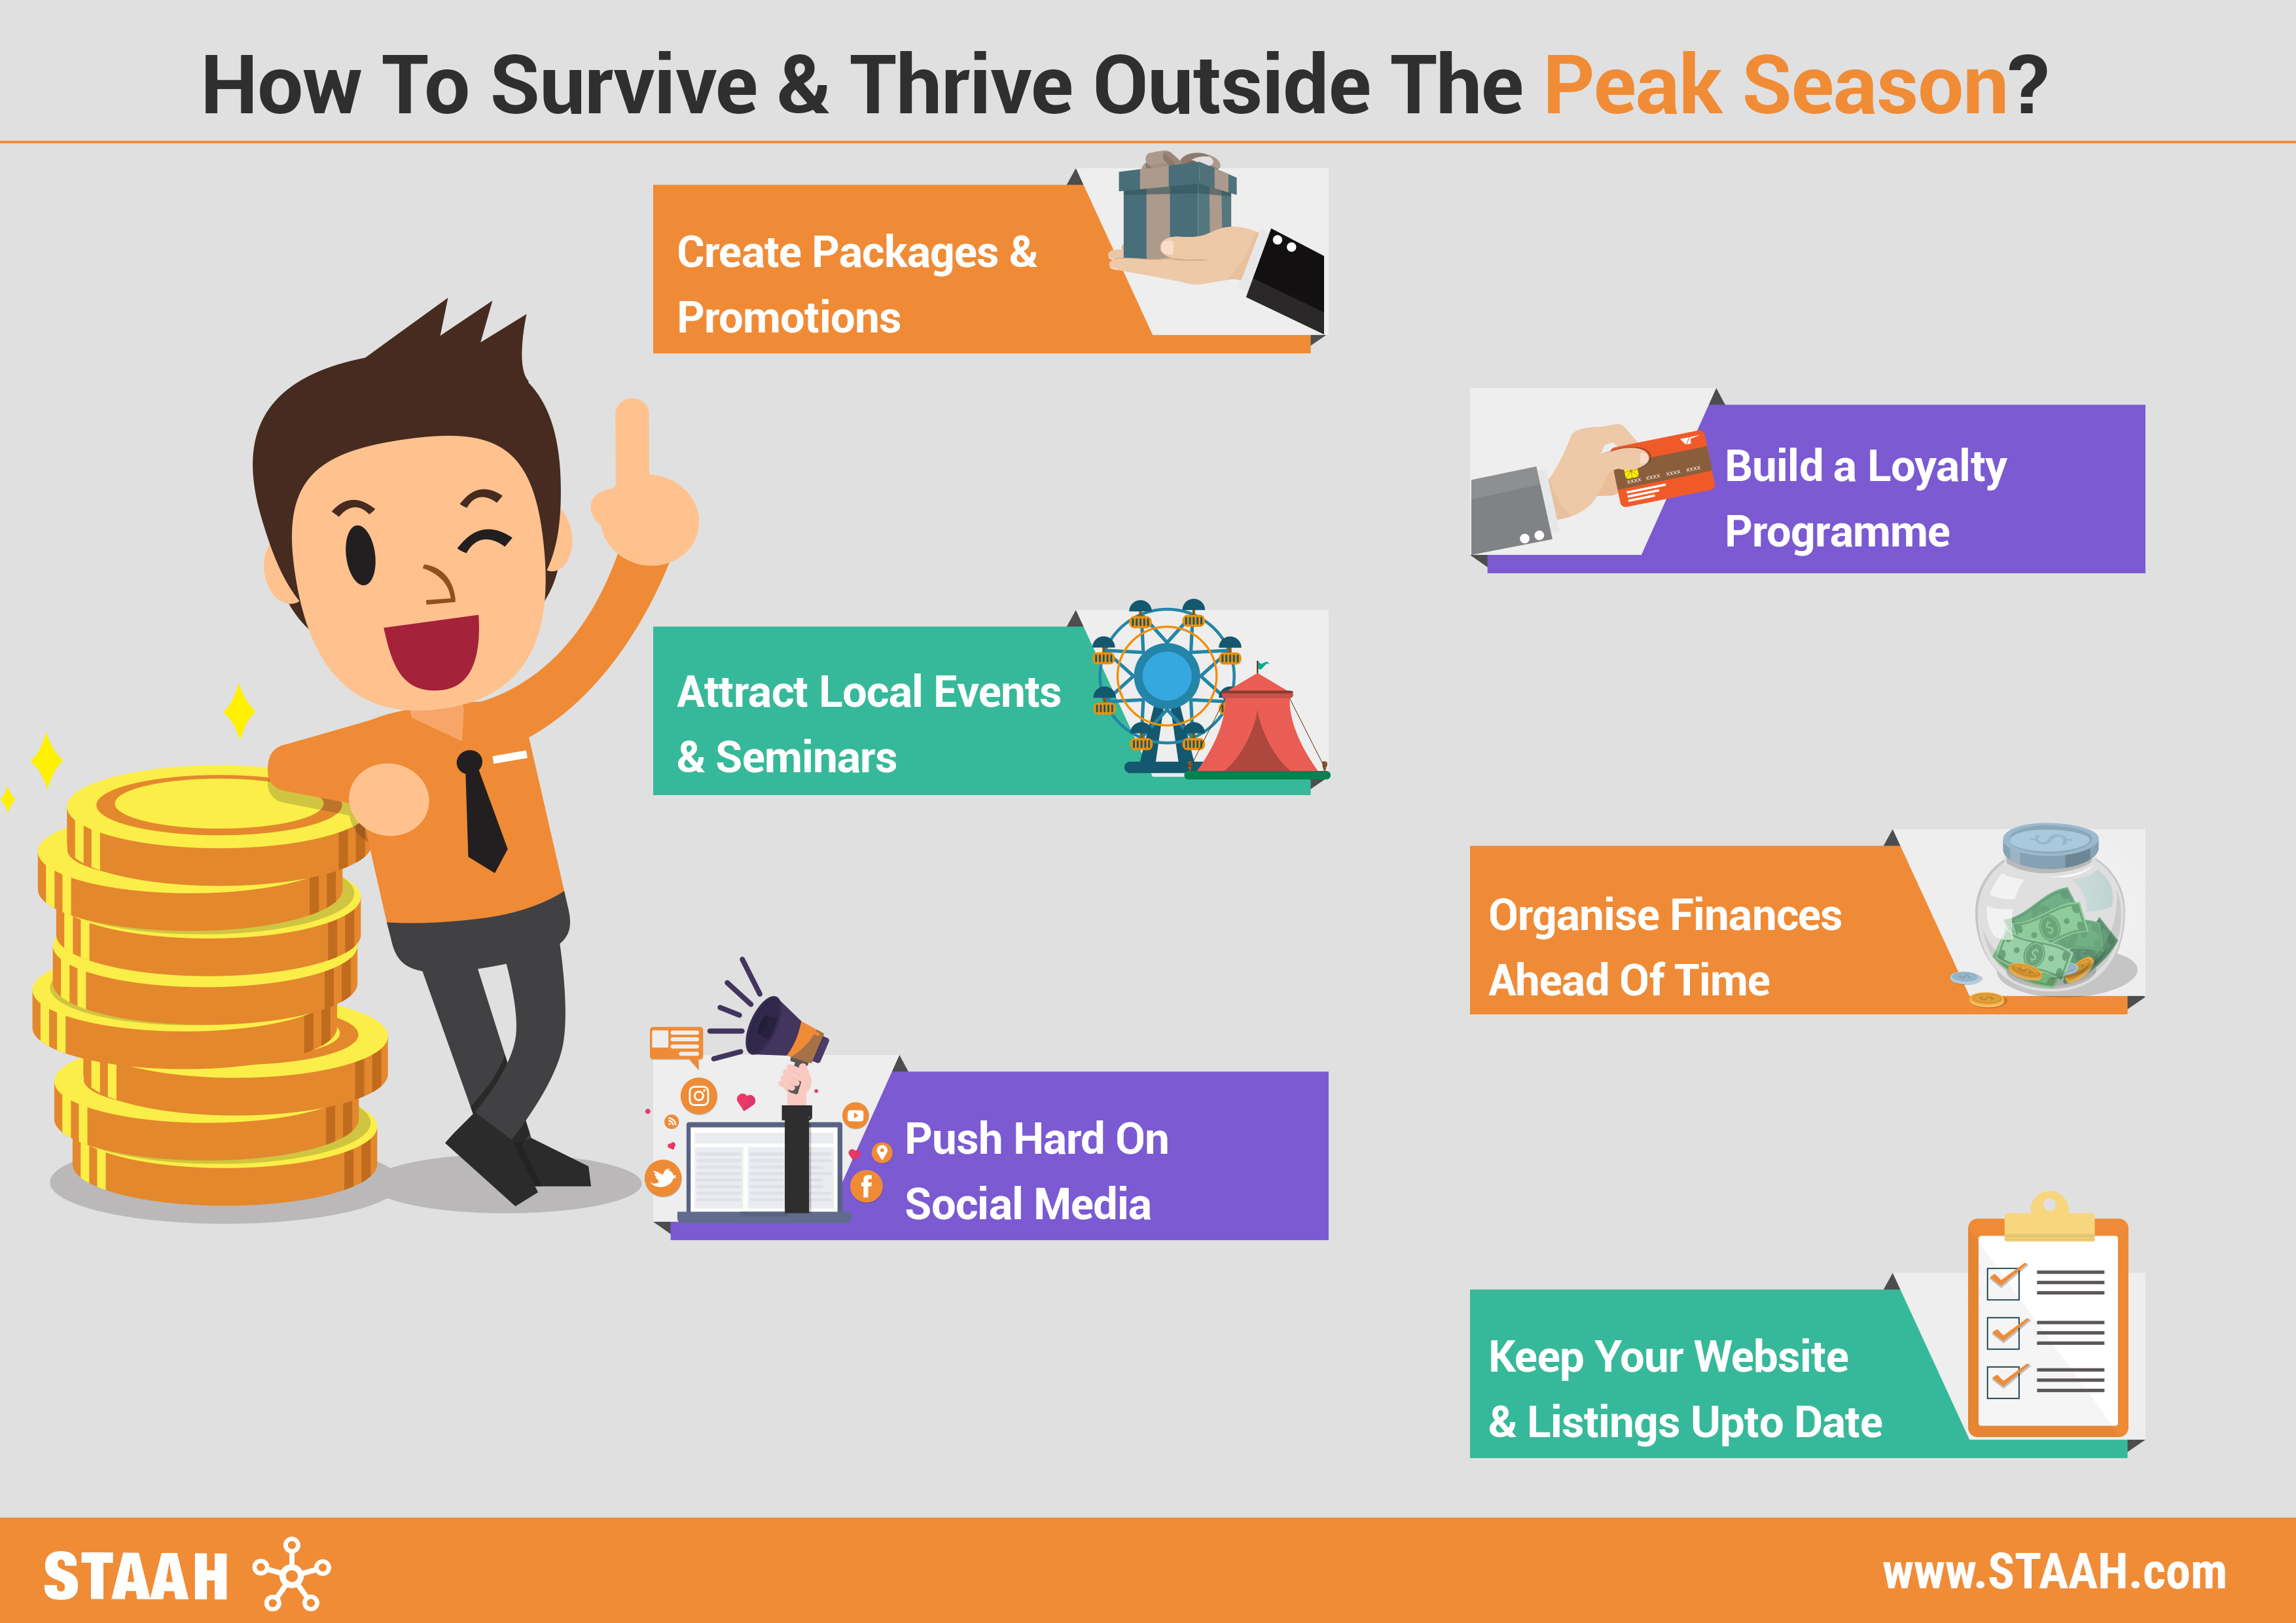 How To Survive and Thrive Outside The Peak Season?